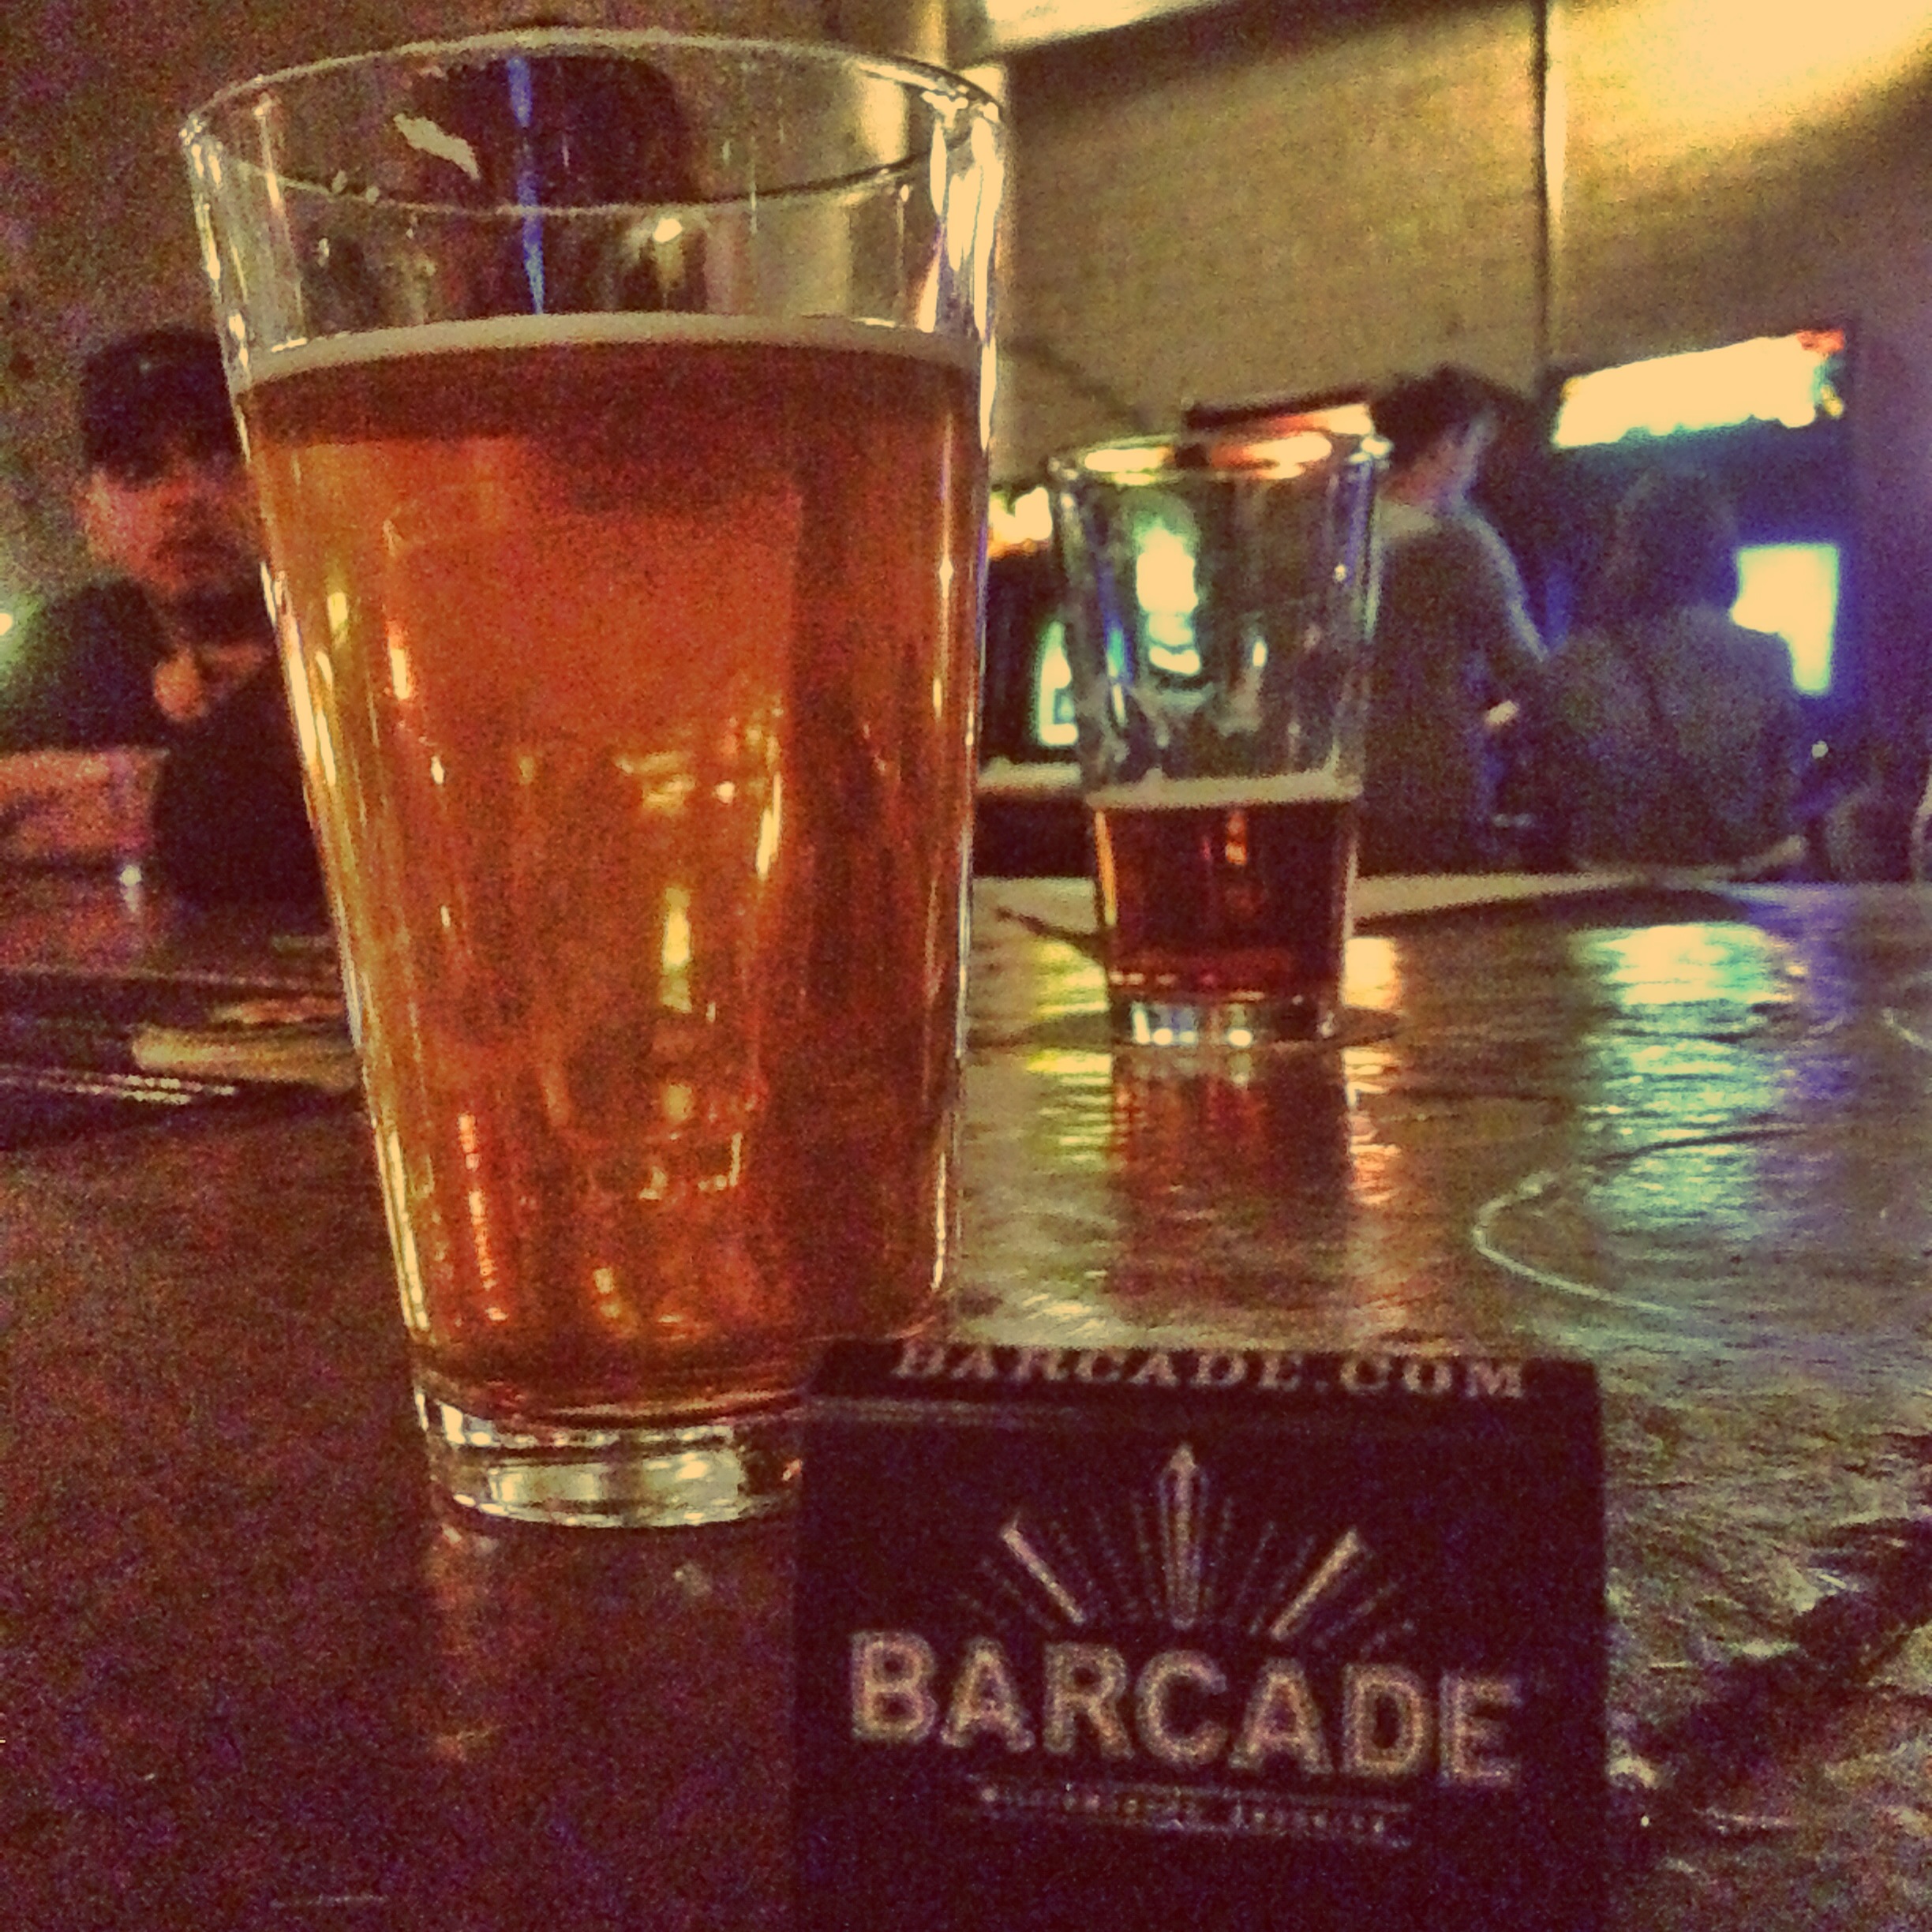  Barcade in New York City. "Barcade" has also become a term for establishments that feature alcohol and videogames as adult leisure spots. 